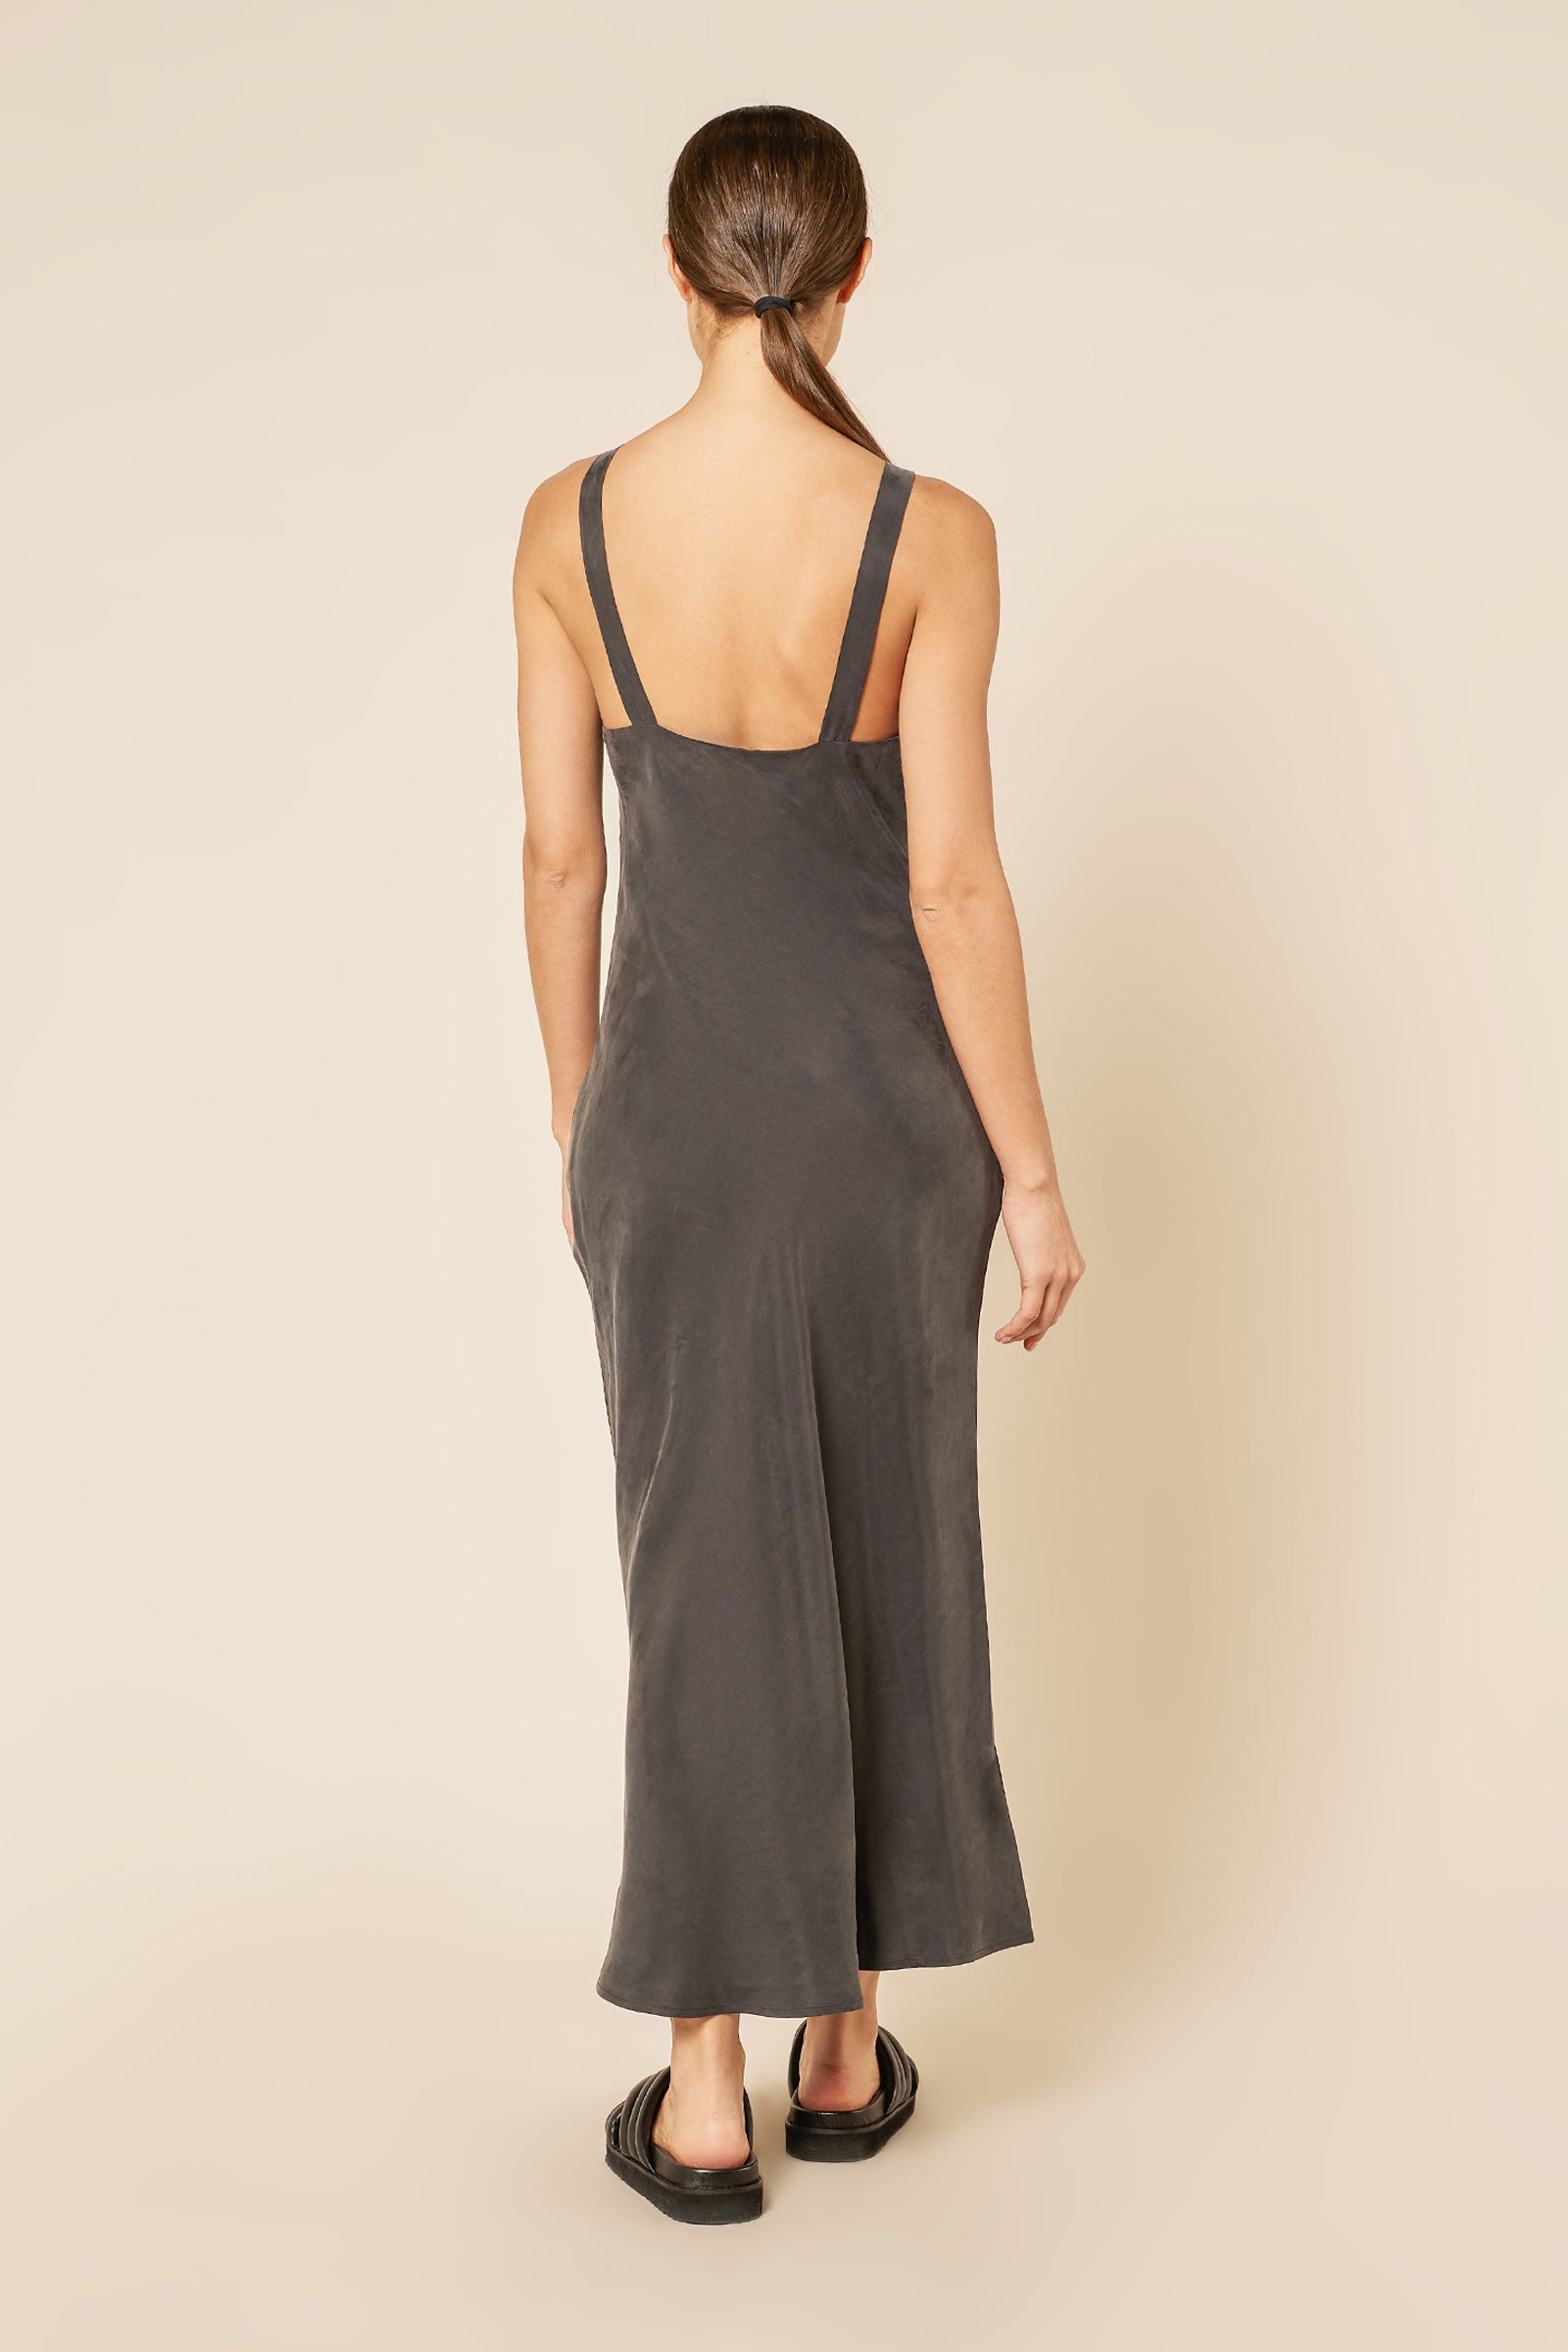 Nude Lucy Gia Cupro Dress in a Dark Grey In a Brown Coal Colour